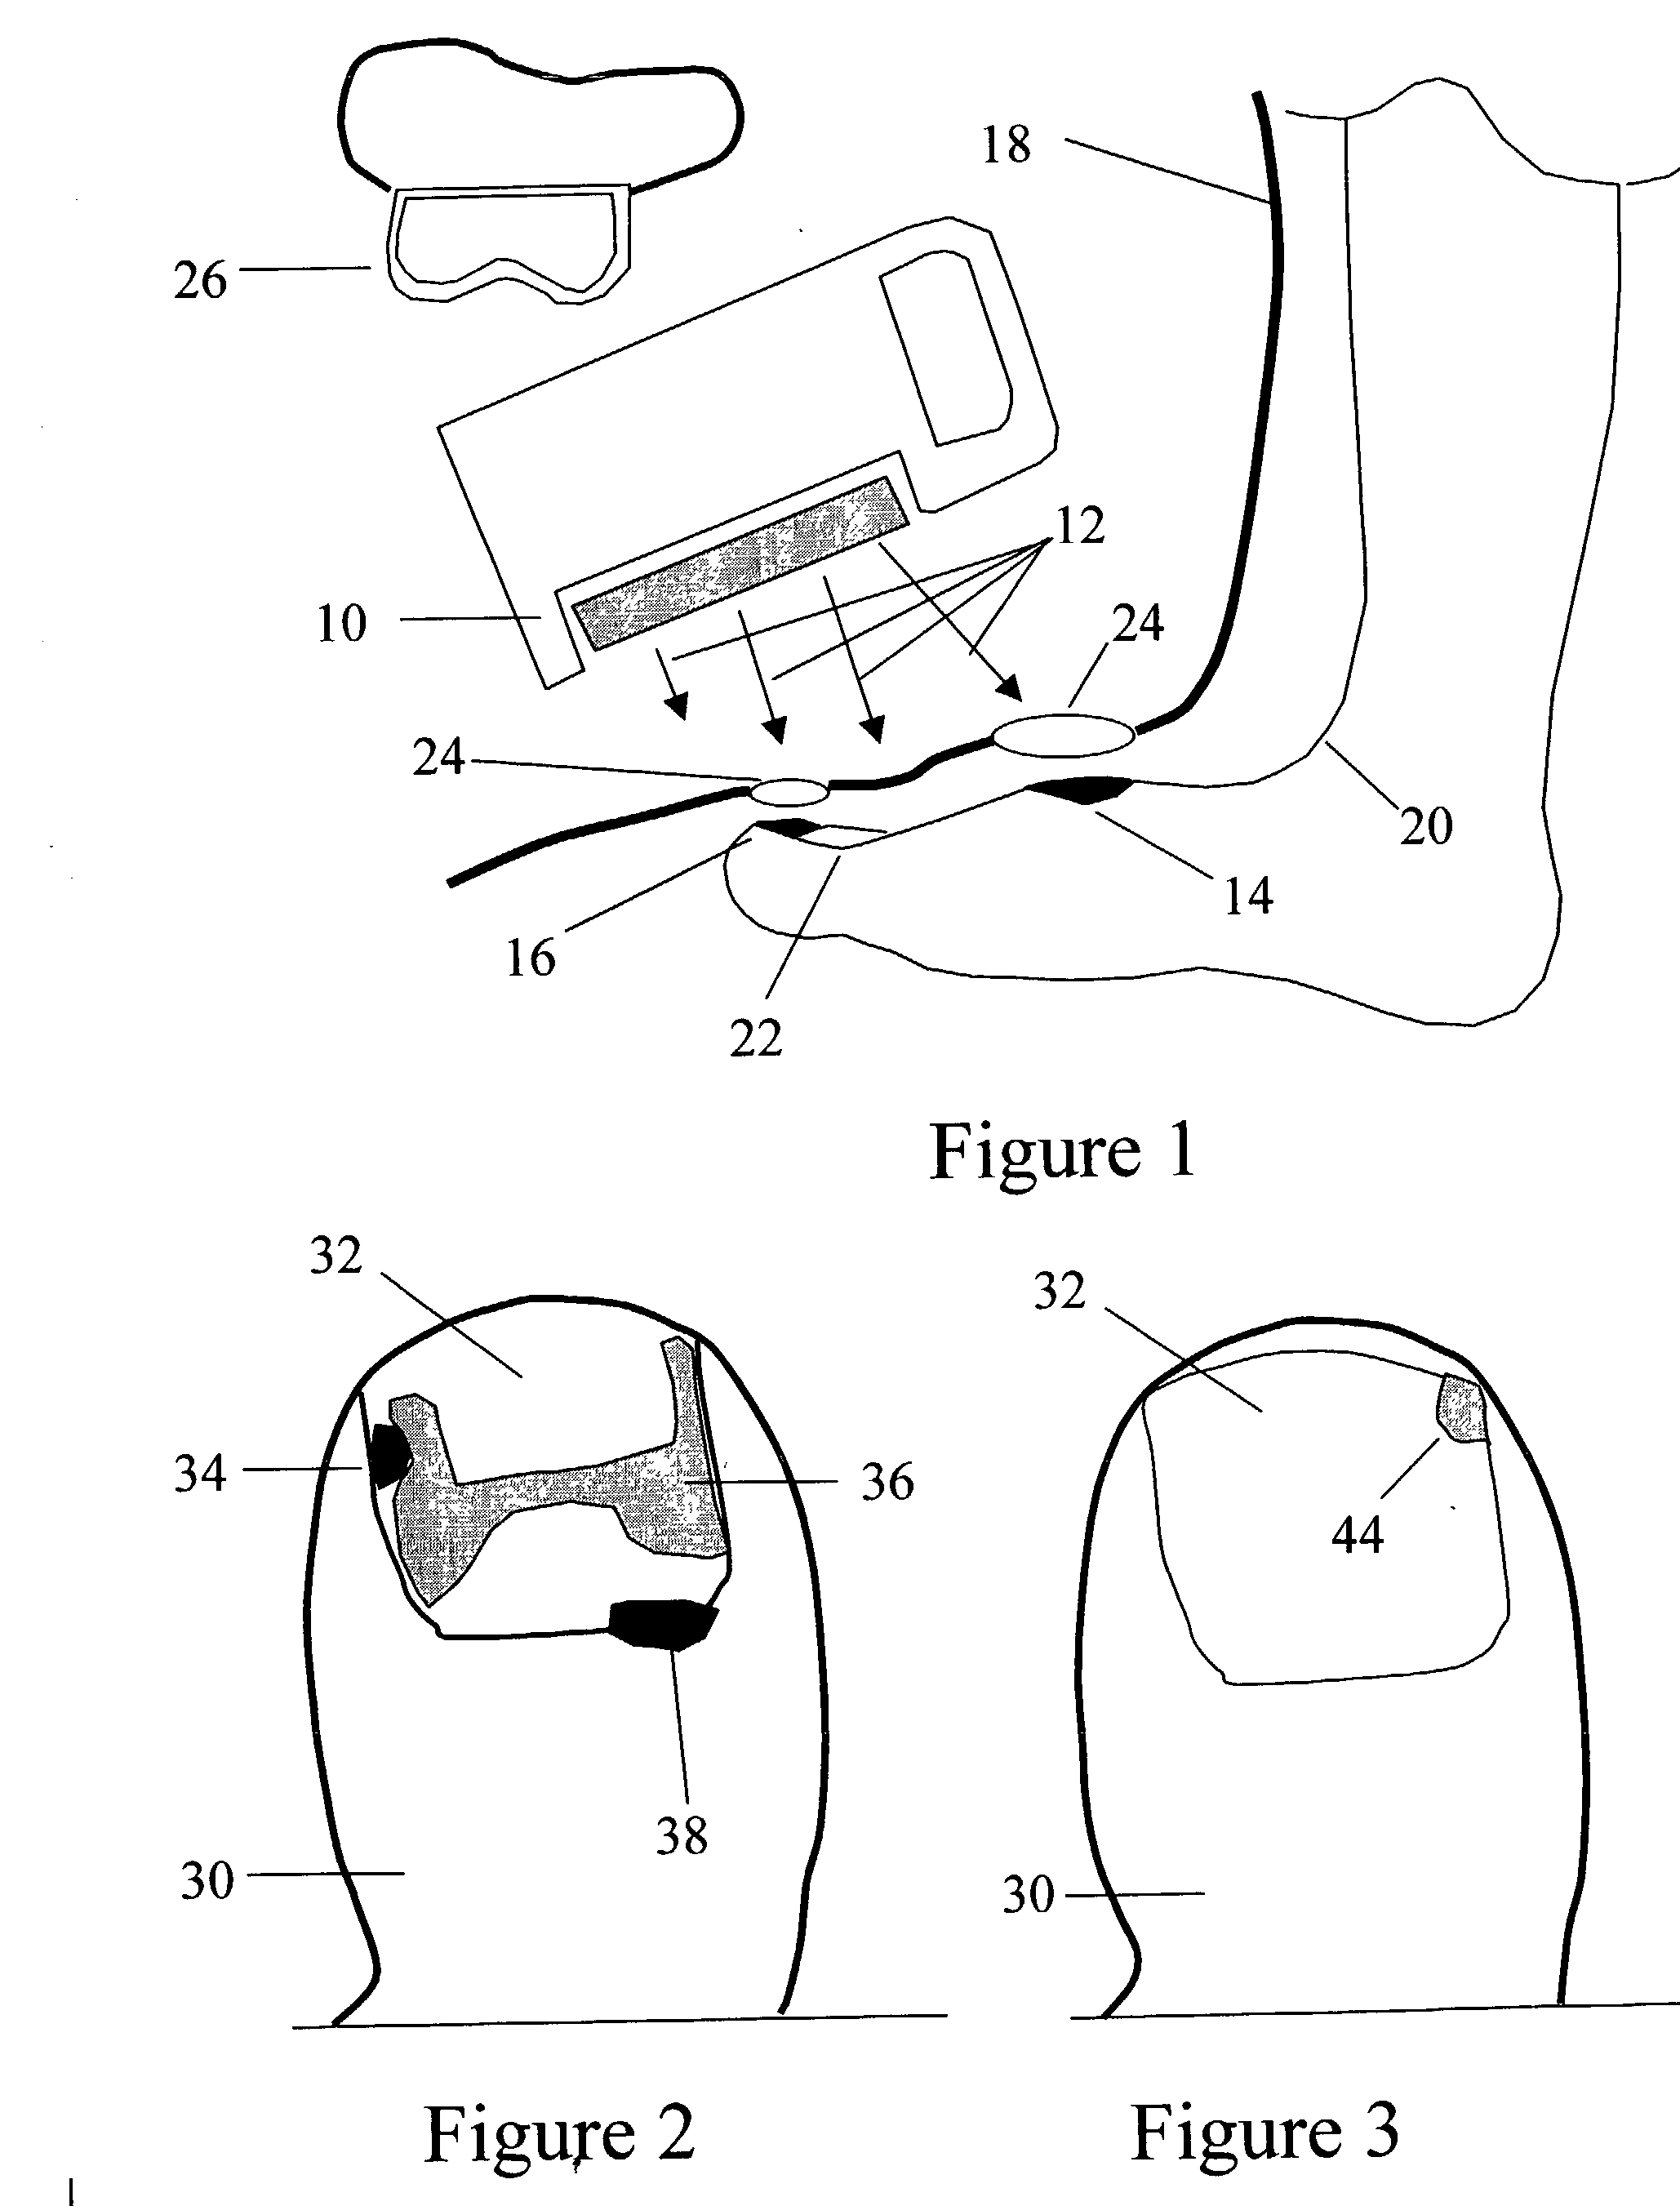 Method for the prevention and treatment of skin and nail infections